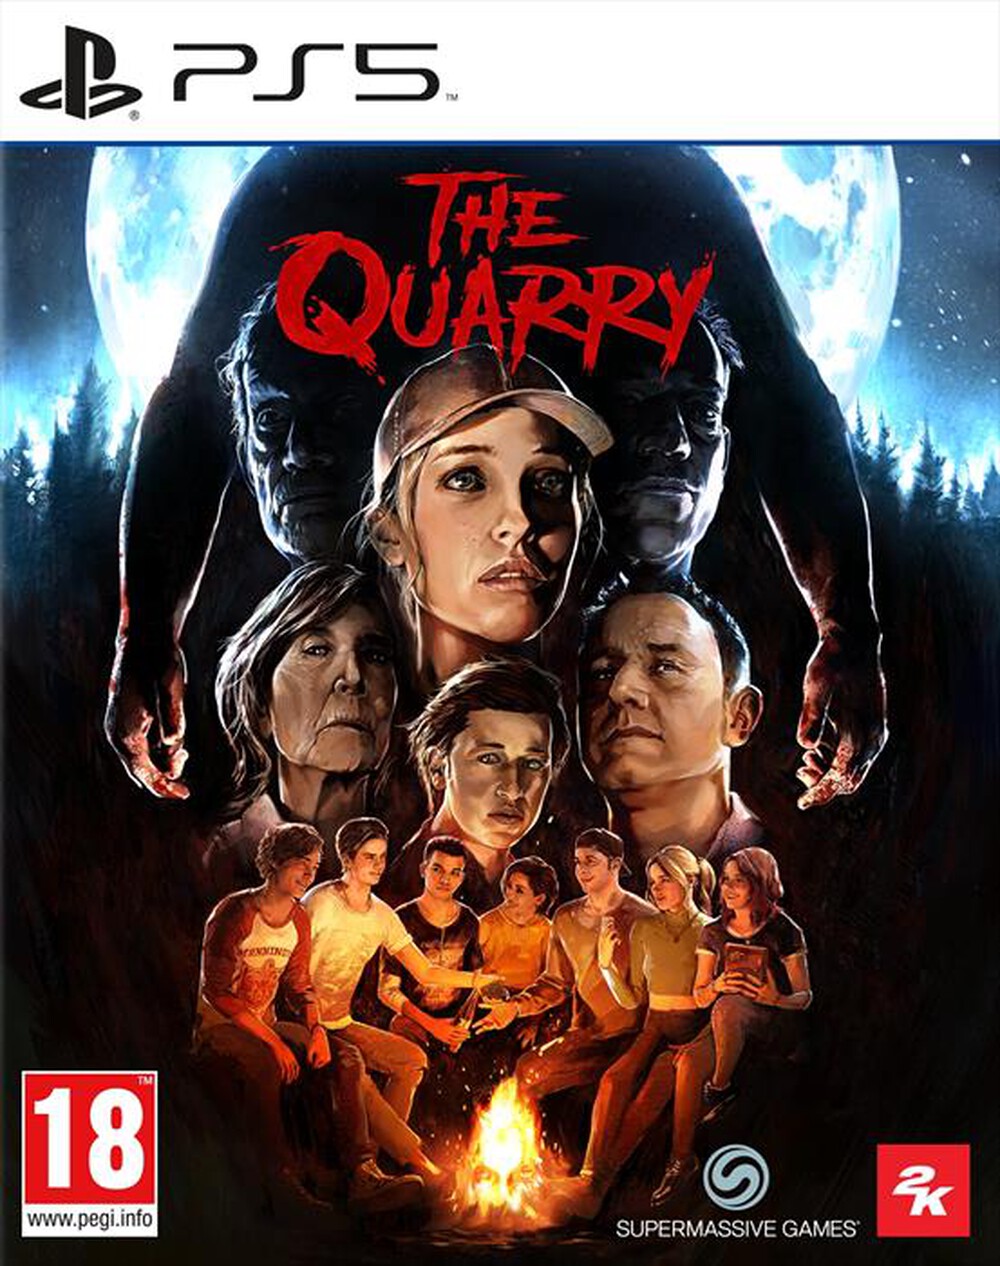 "2K GAMES - THE QUARRY PS5"